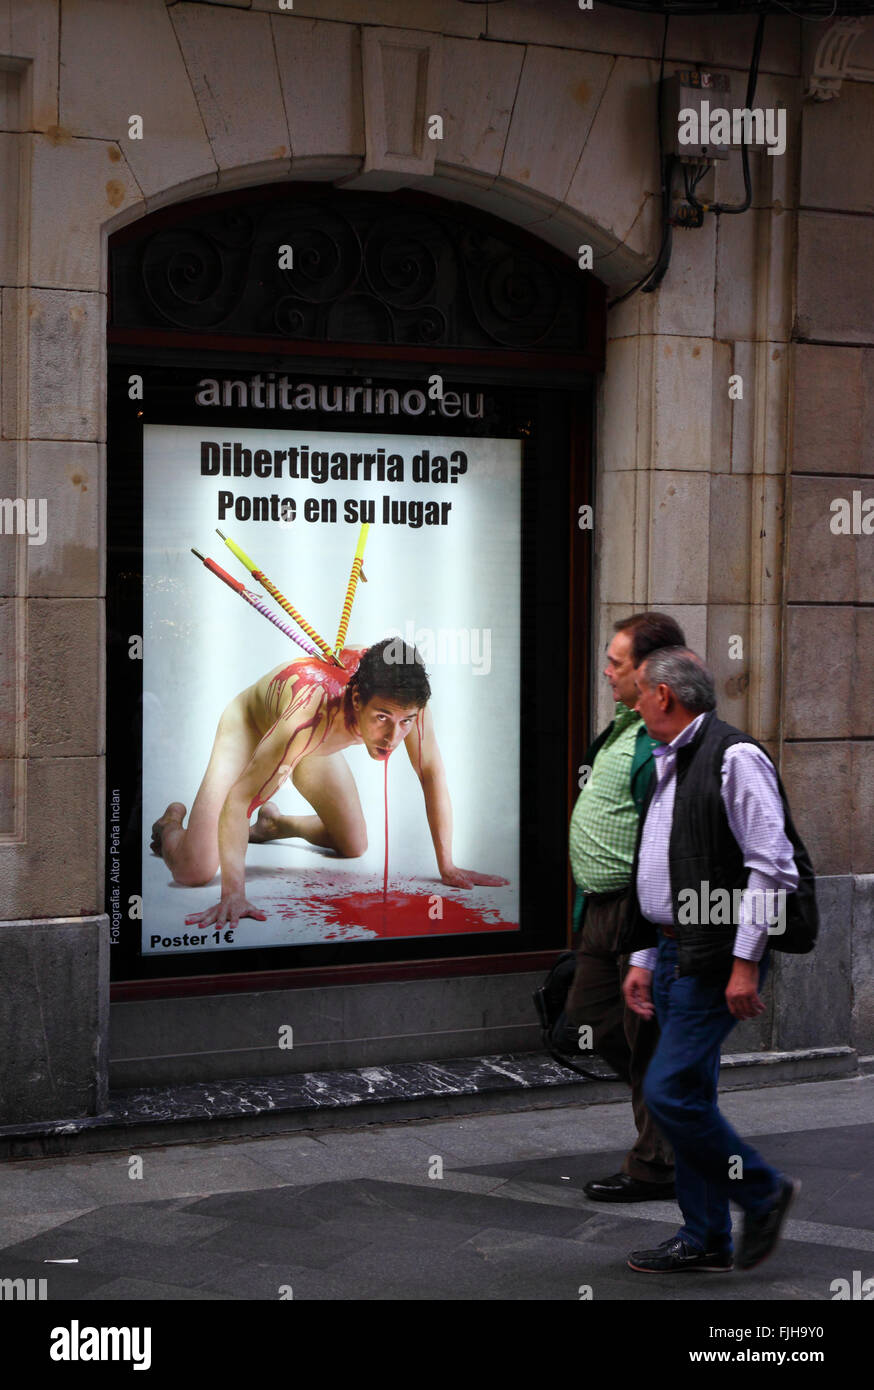 People walking past a poster in window protesting against bullfighting, Casco Viejo, Bilbao, Basque Country, Spain Stock Photo